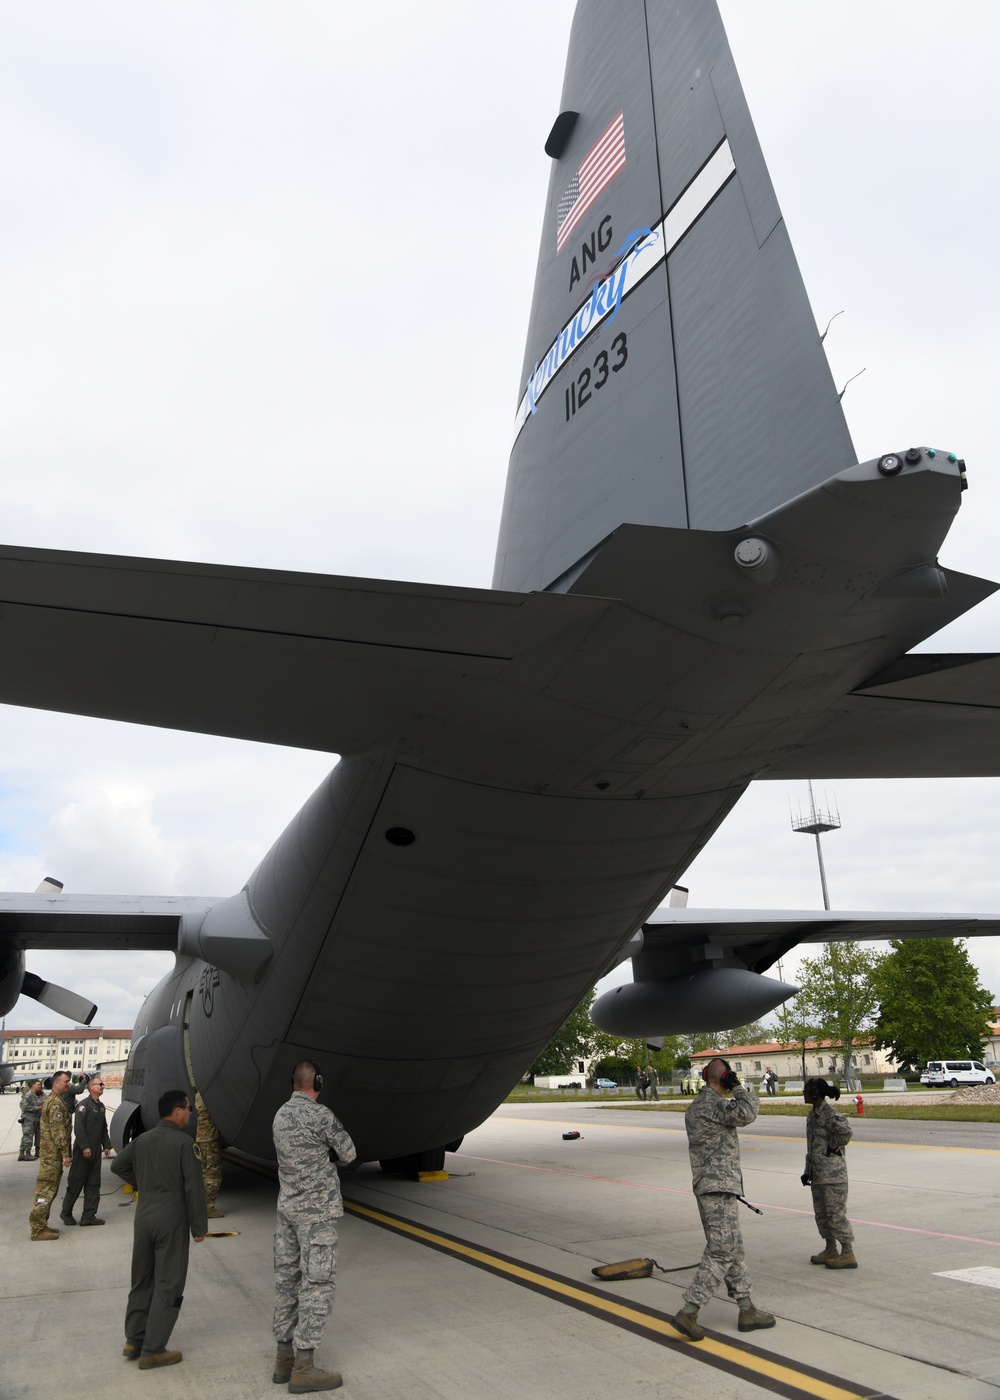 Immediate Response 2019 kicks off with 512th Contingency Response Element coordination